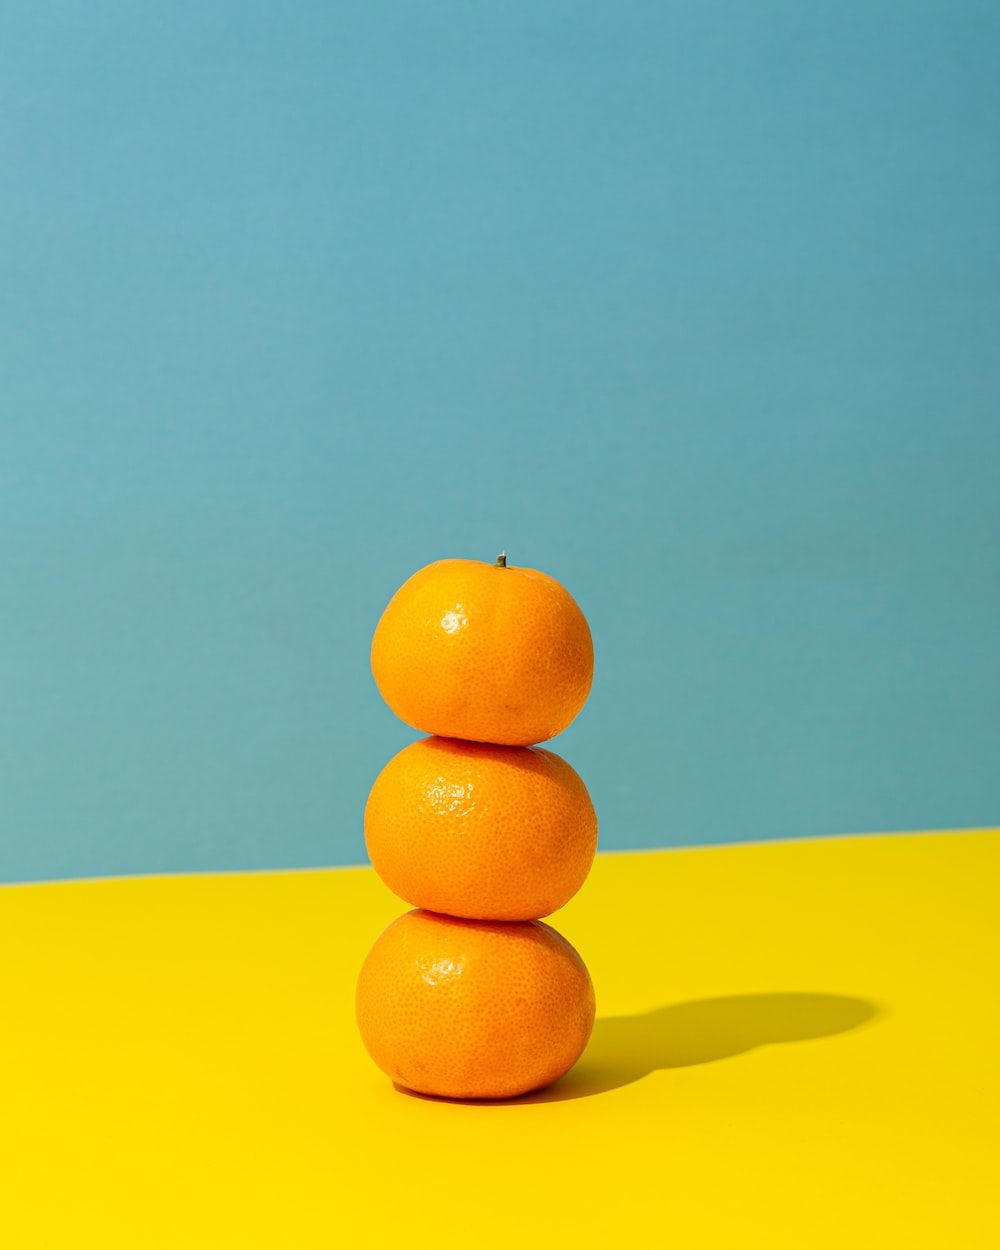 A stack of oranges on top each other - Fruit